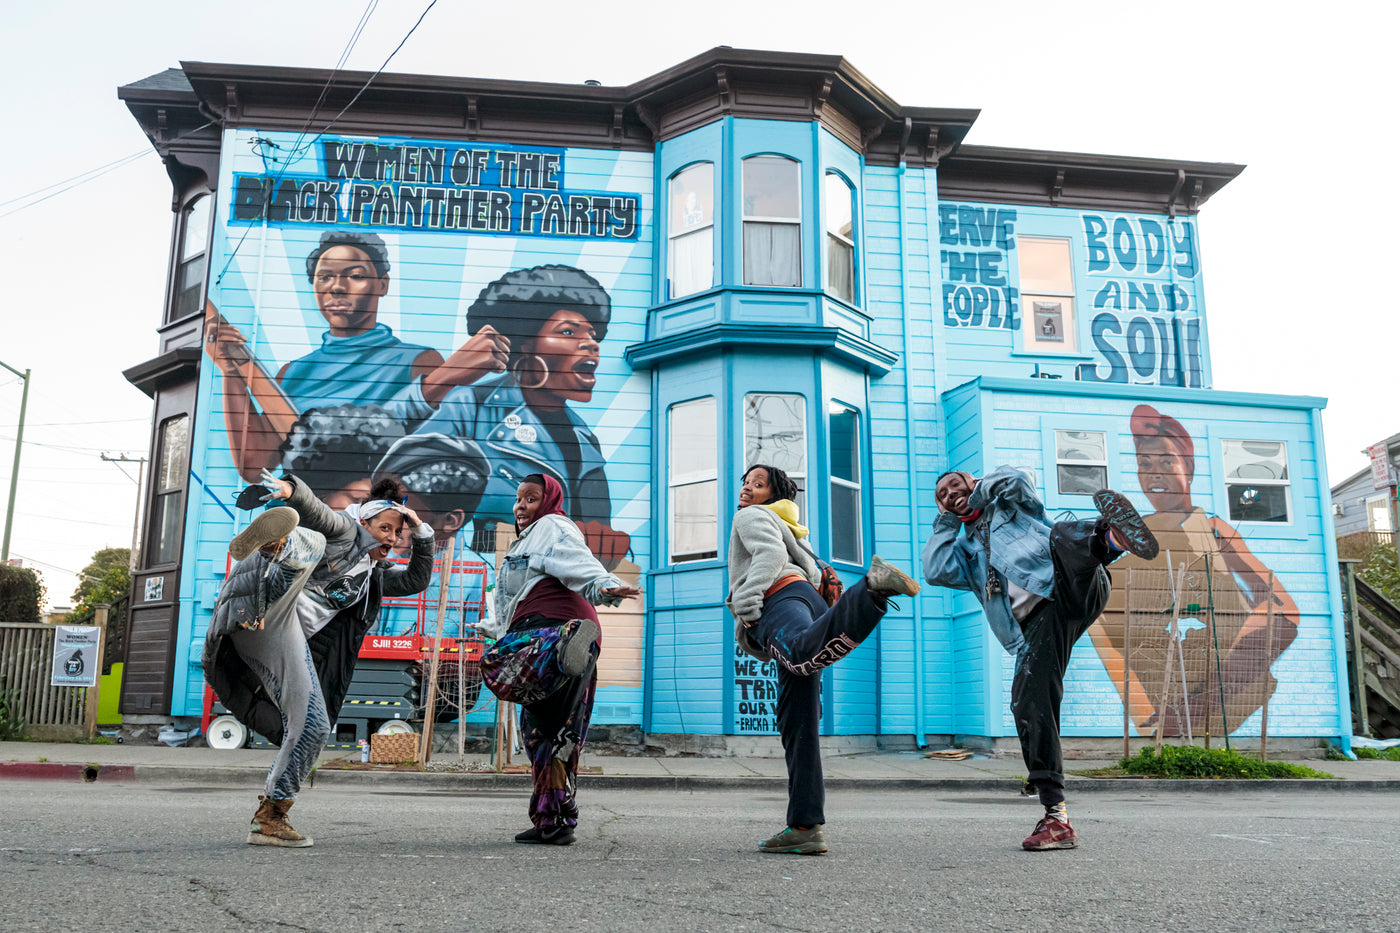 We are Black Panther Party leaders(Jilchristina Vest, Rachel Wolfe-Goldsmith, Stephen Shames, Ericka Huggins), artists, homeowners, community members, healers, and activists joined together to honor the Women of The Black Panther Party and their legacy.